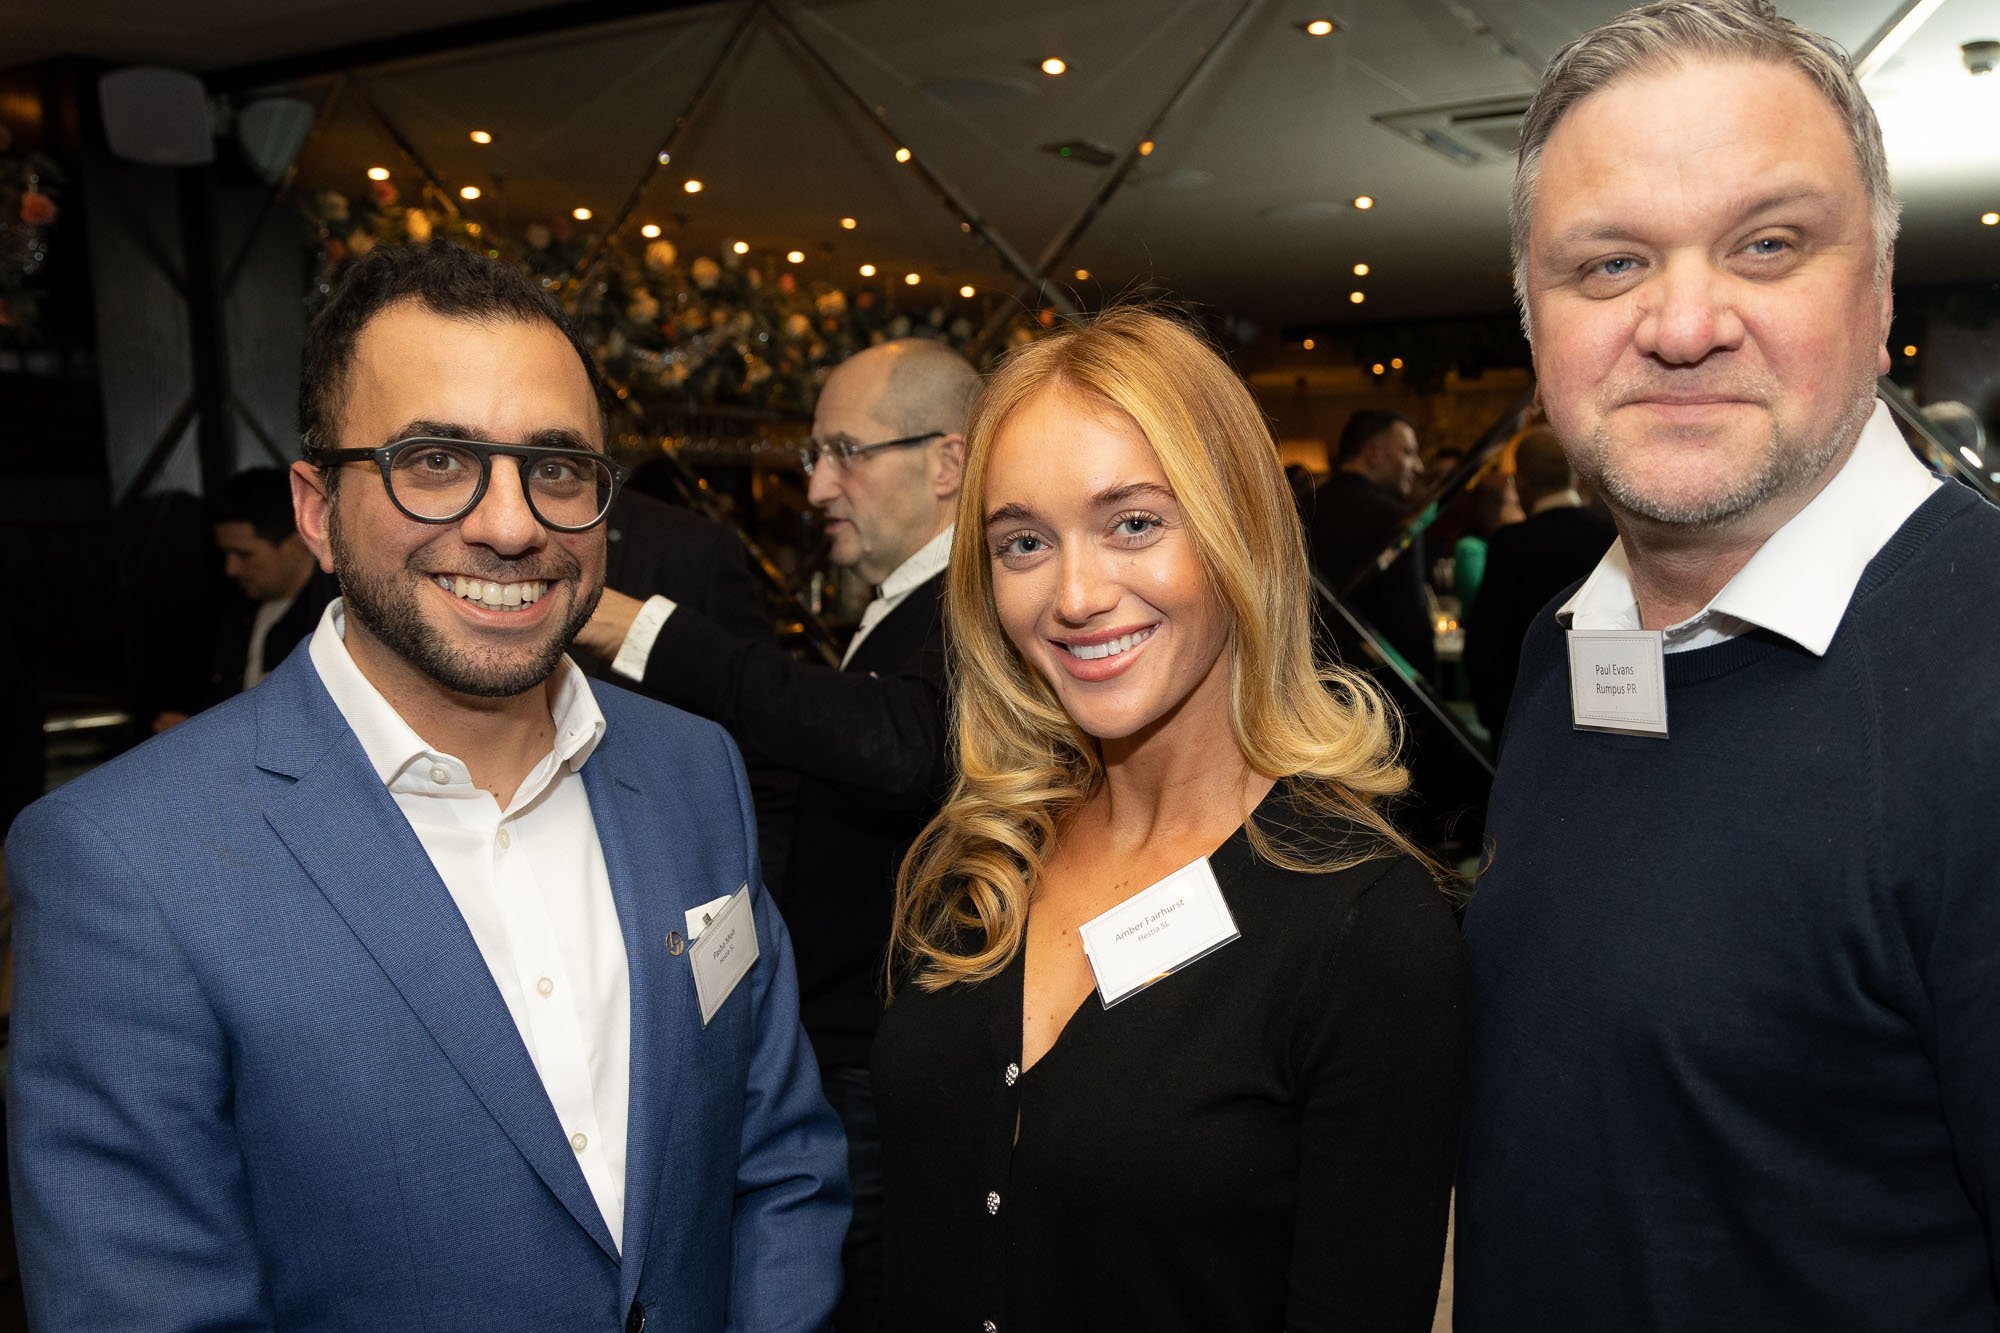 Business networking meeting hosted by Glossy Magazine at Piccolino Restaurant Hale Manchester-7.jpg